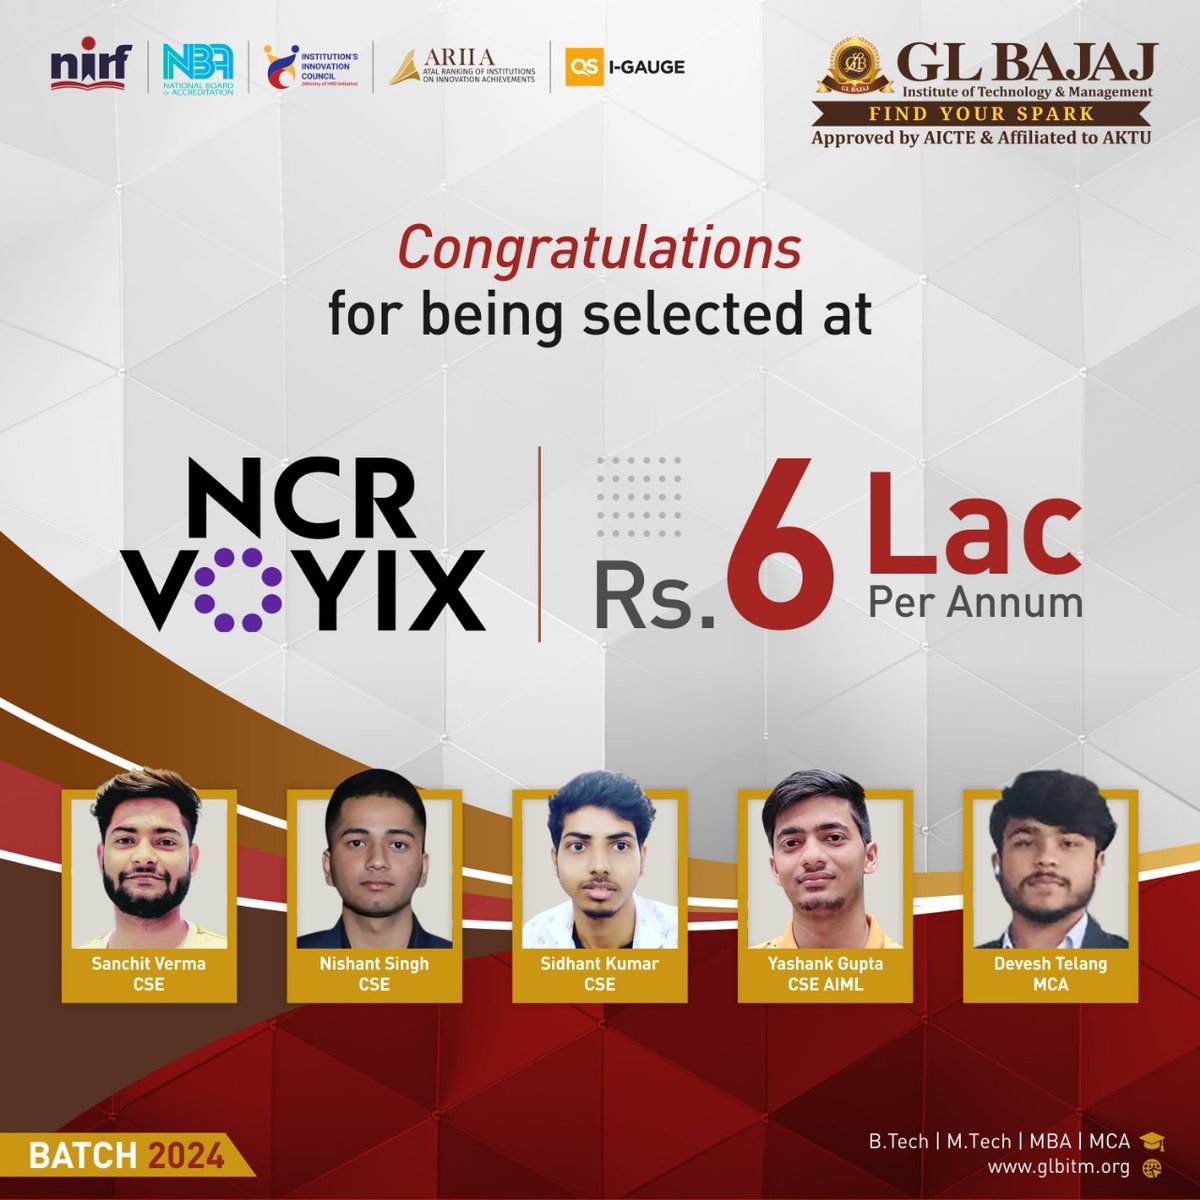 #GLBajaj (#GLBITM) is very proud to announce the placement of its 5 bright #students from #BTech ( CSE, AIML) and #MCA Batch 2024 for getting placed at NCR Voyix Corporation.

#campusplacement #education #CSE #cseaiml #NCRVoyixCorporation #jobs #jobs2024 #placements2024